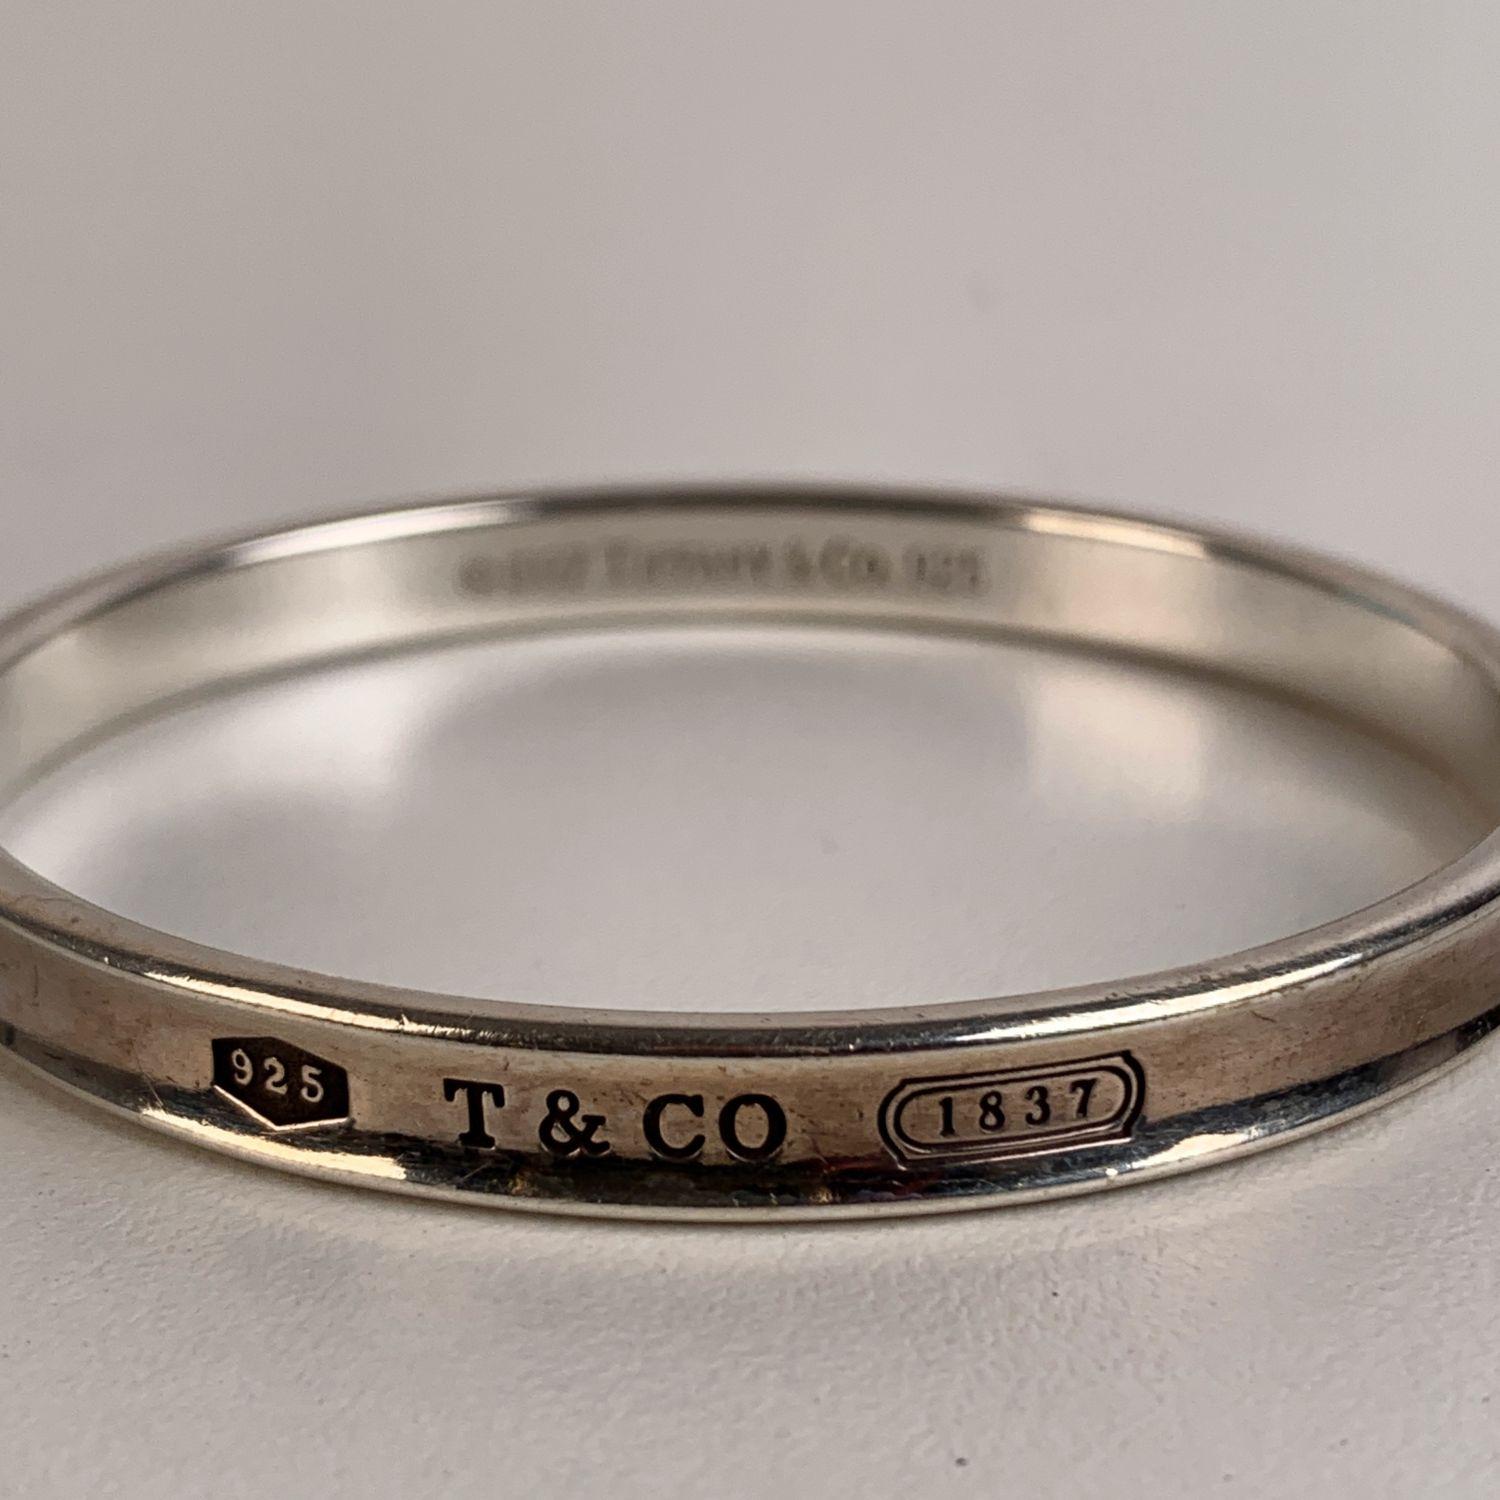 Tifffany & Co. Sterling Silver 1837 Bangle Cuff Bracelet with Box In Excellent Condition In Rome, Rome